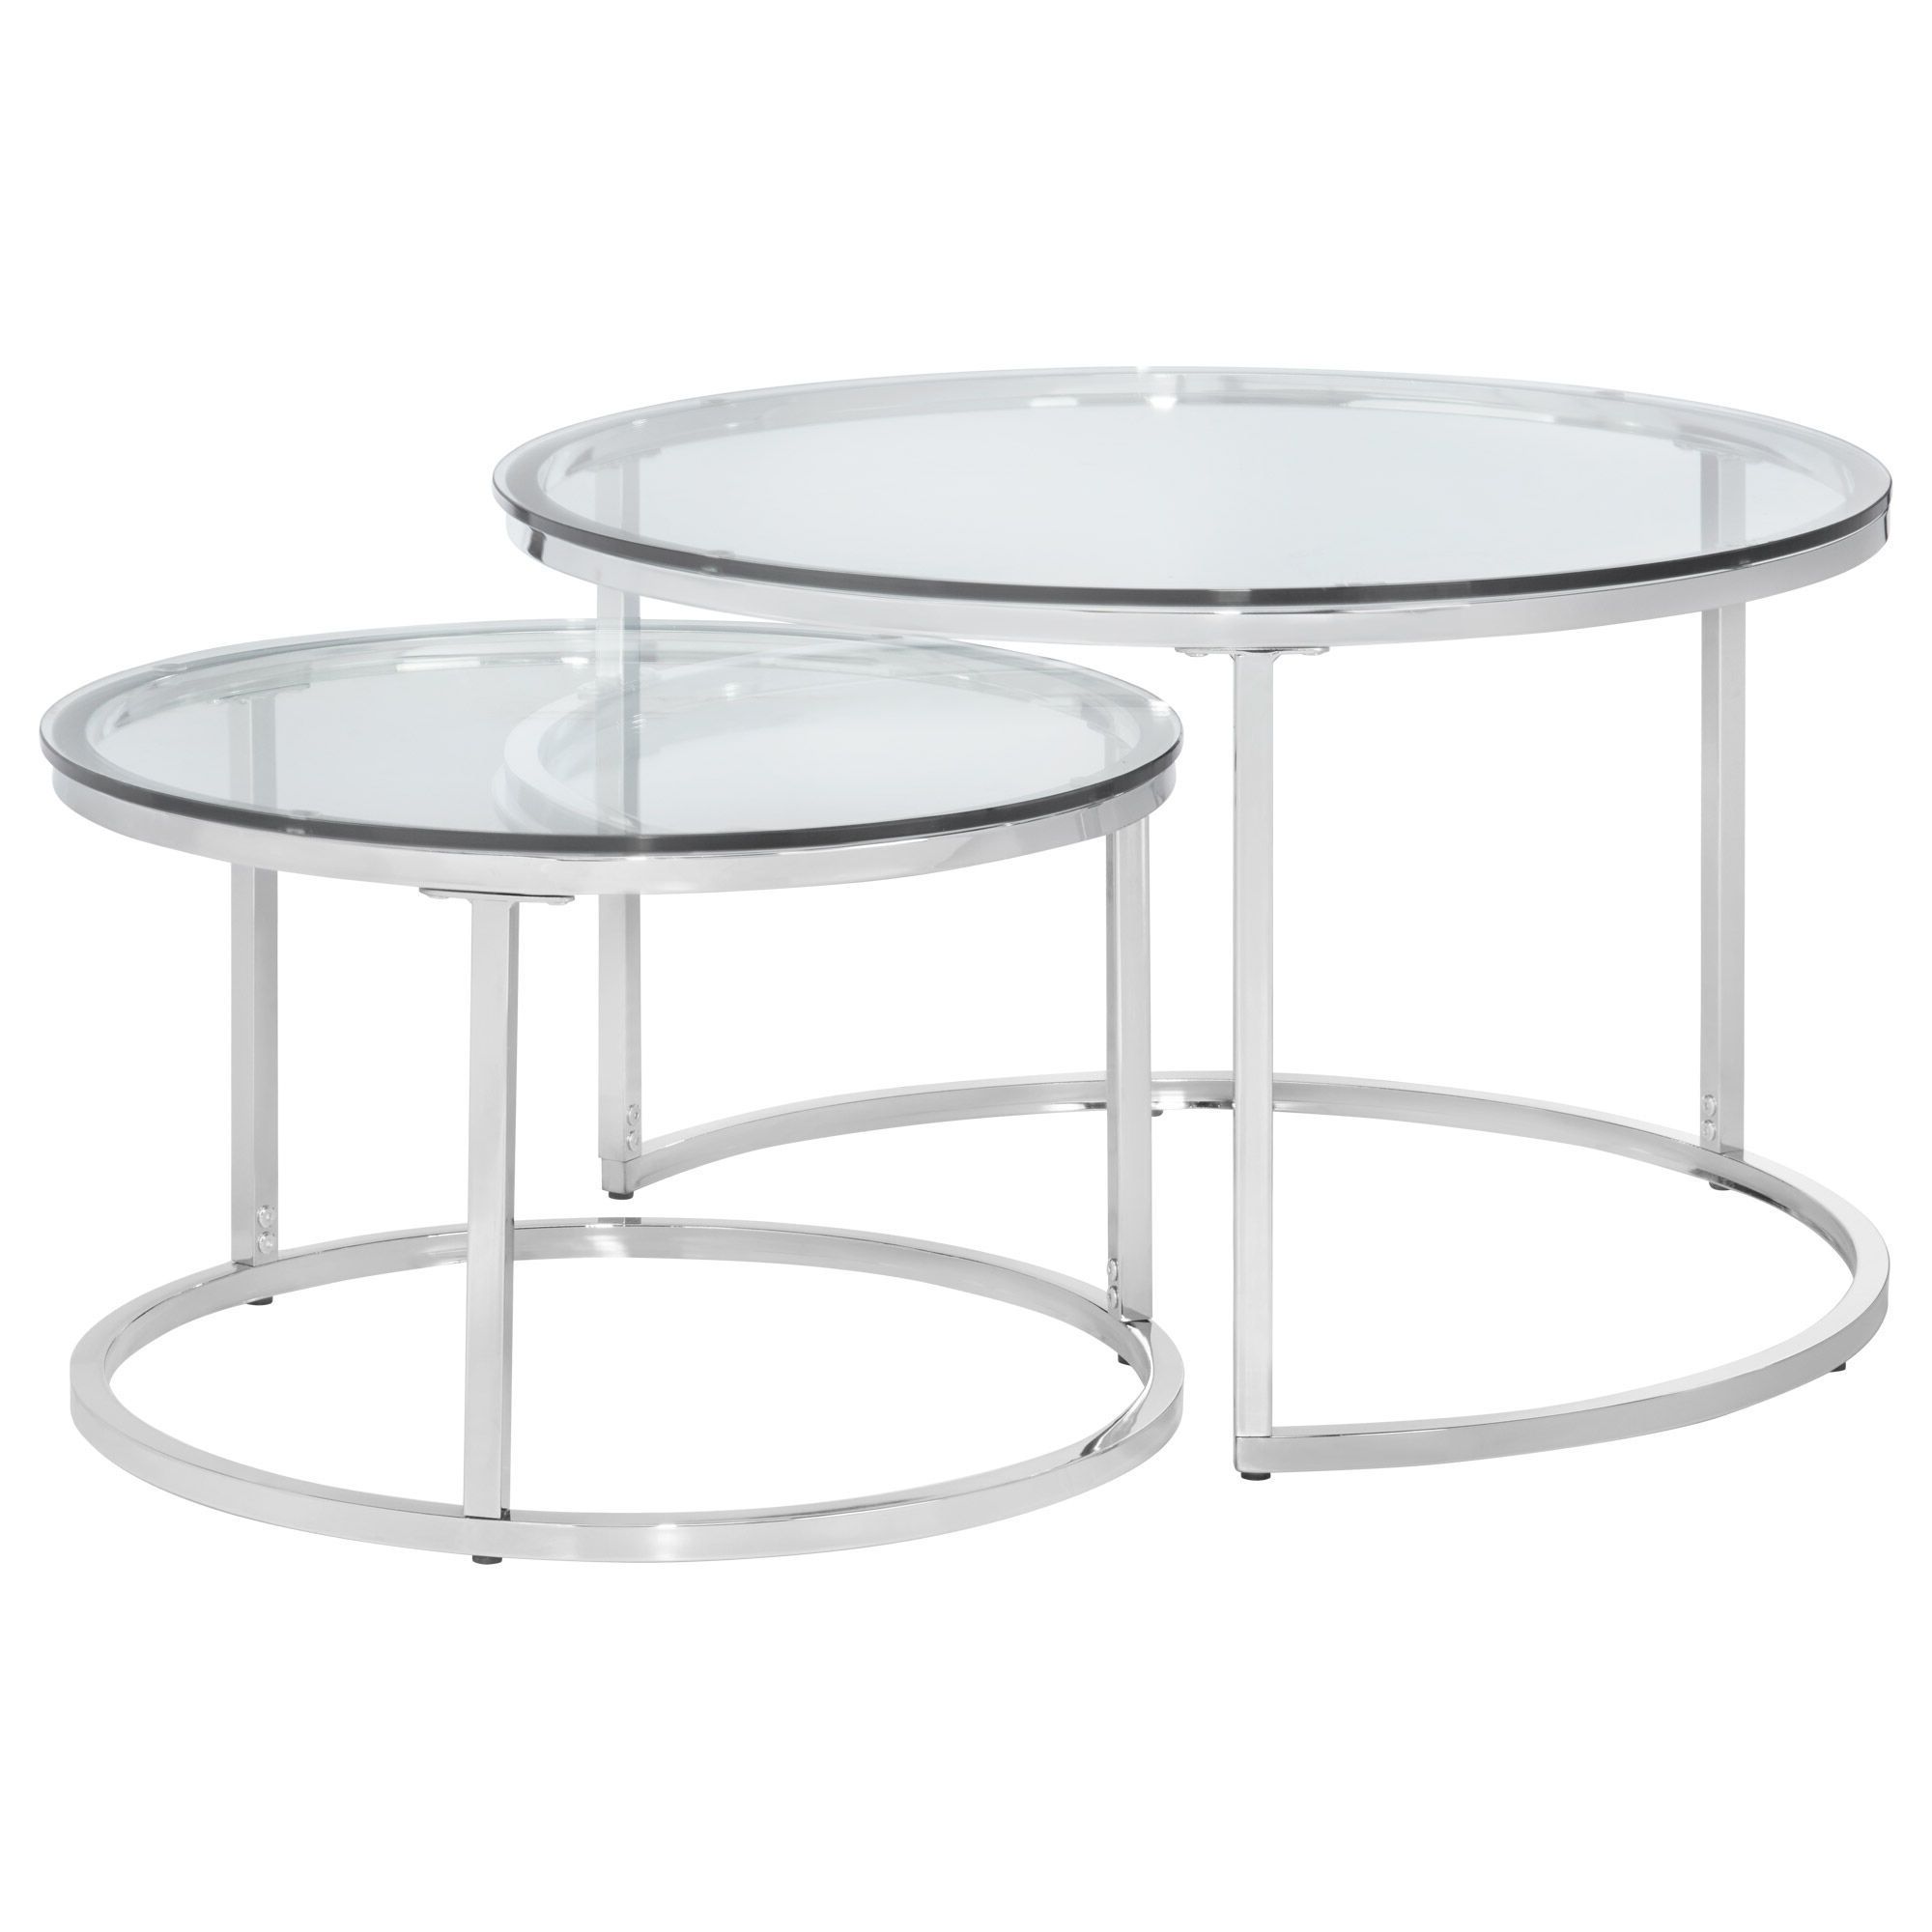 Set Of 2 Tempered Glass Coffee Tables With Metal Legs (View 15 of 15)